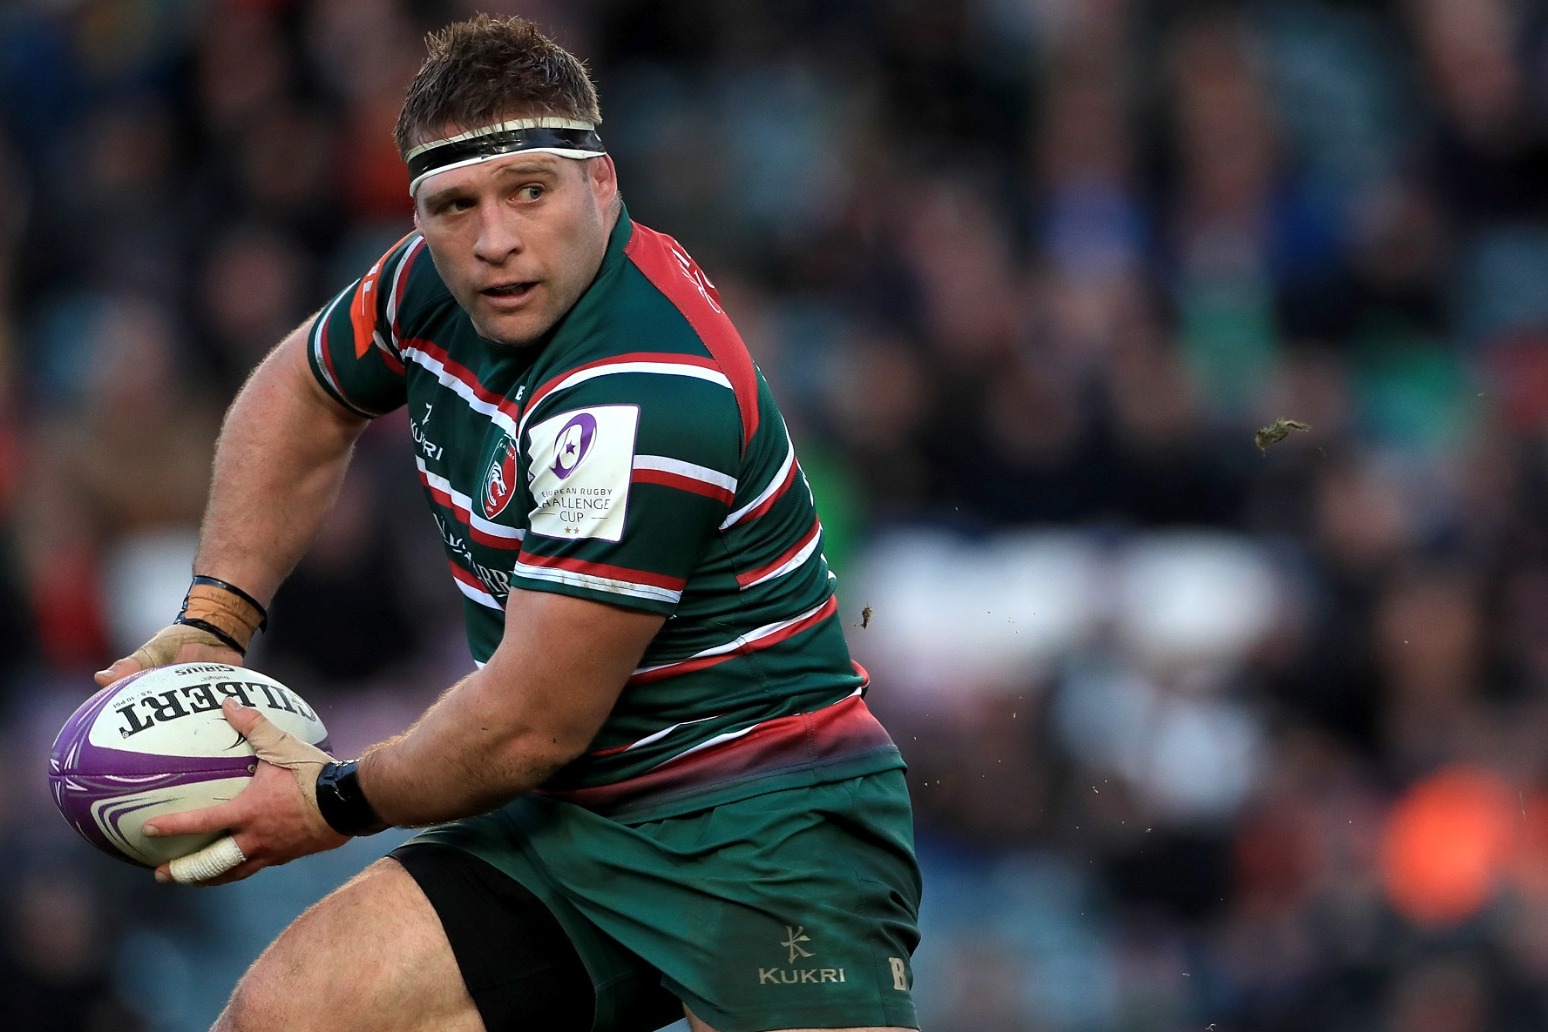 Tom Youngs urges Leicester players to cherish life after announcing retirement 